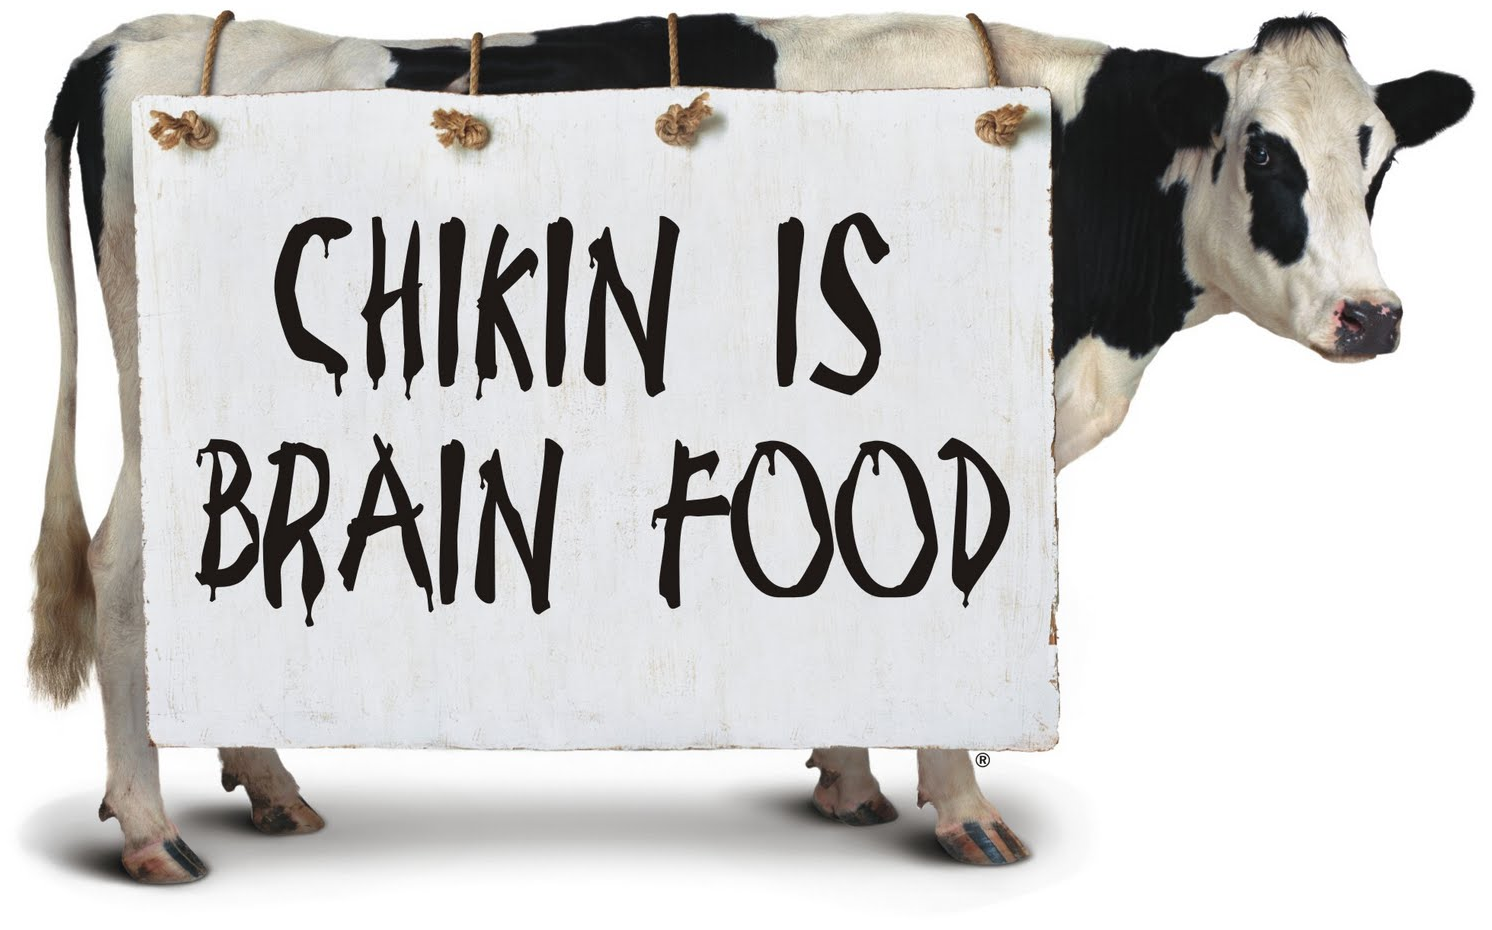 chikin_is_brain_food_cow_chick-fil_a.png